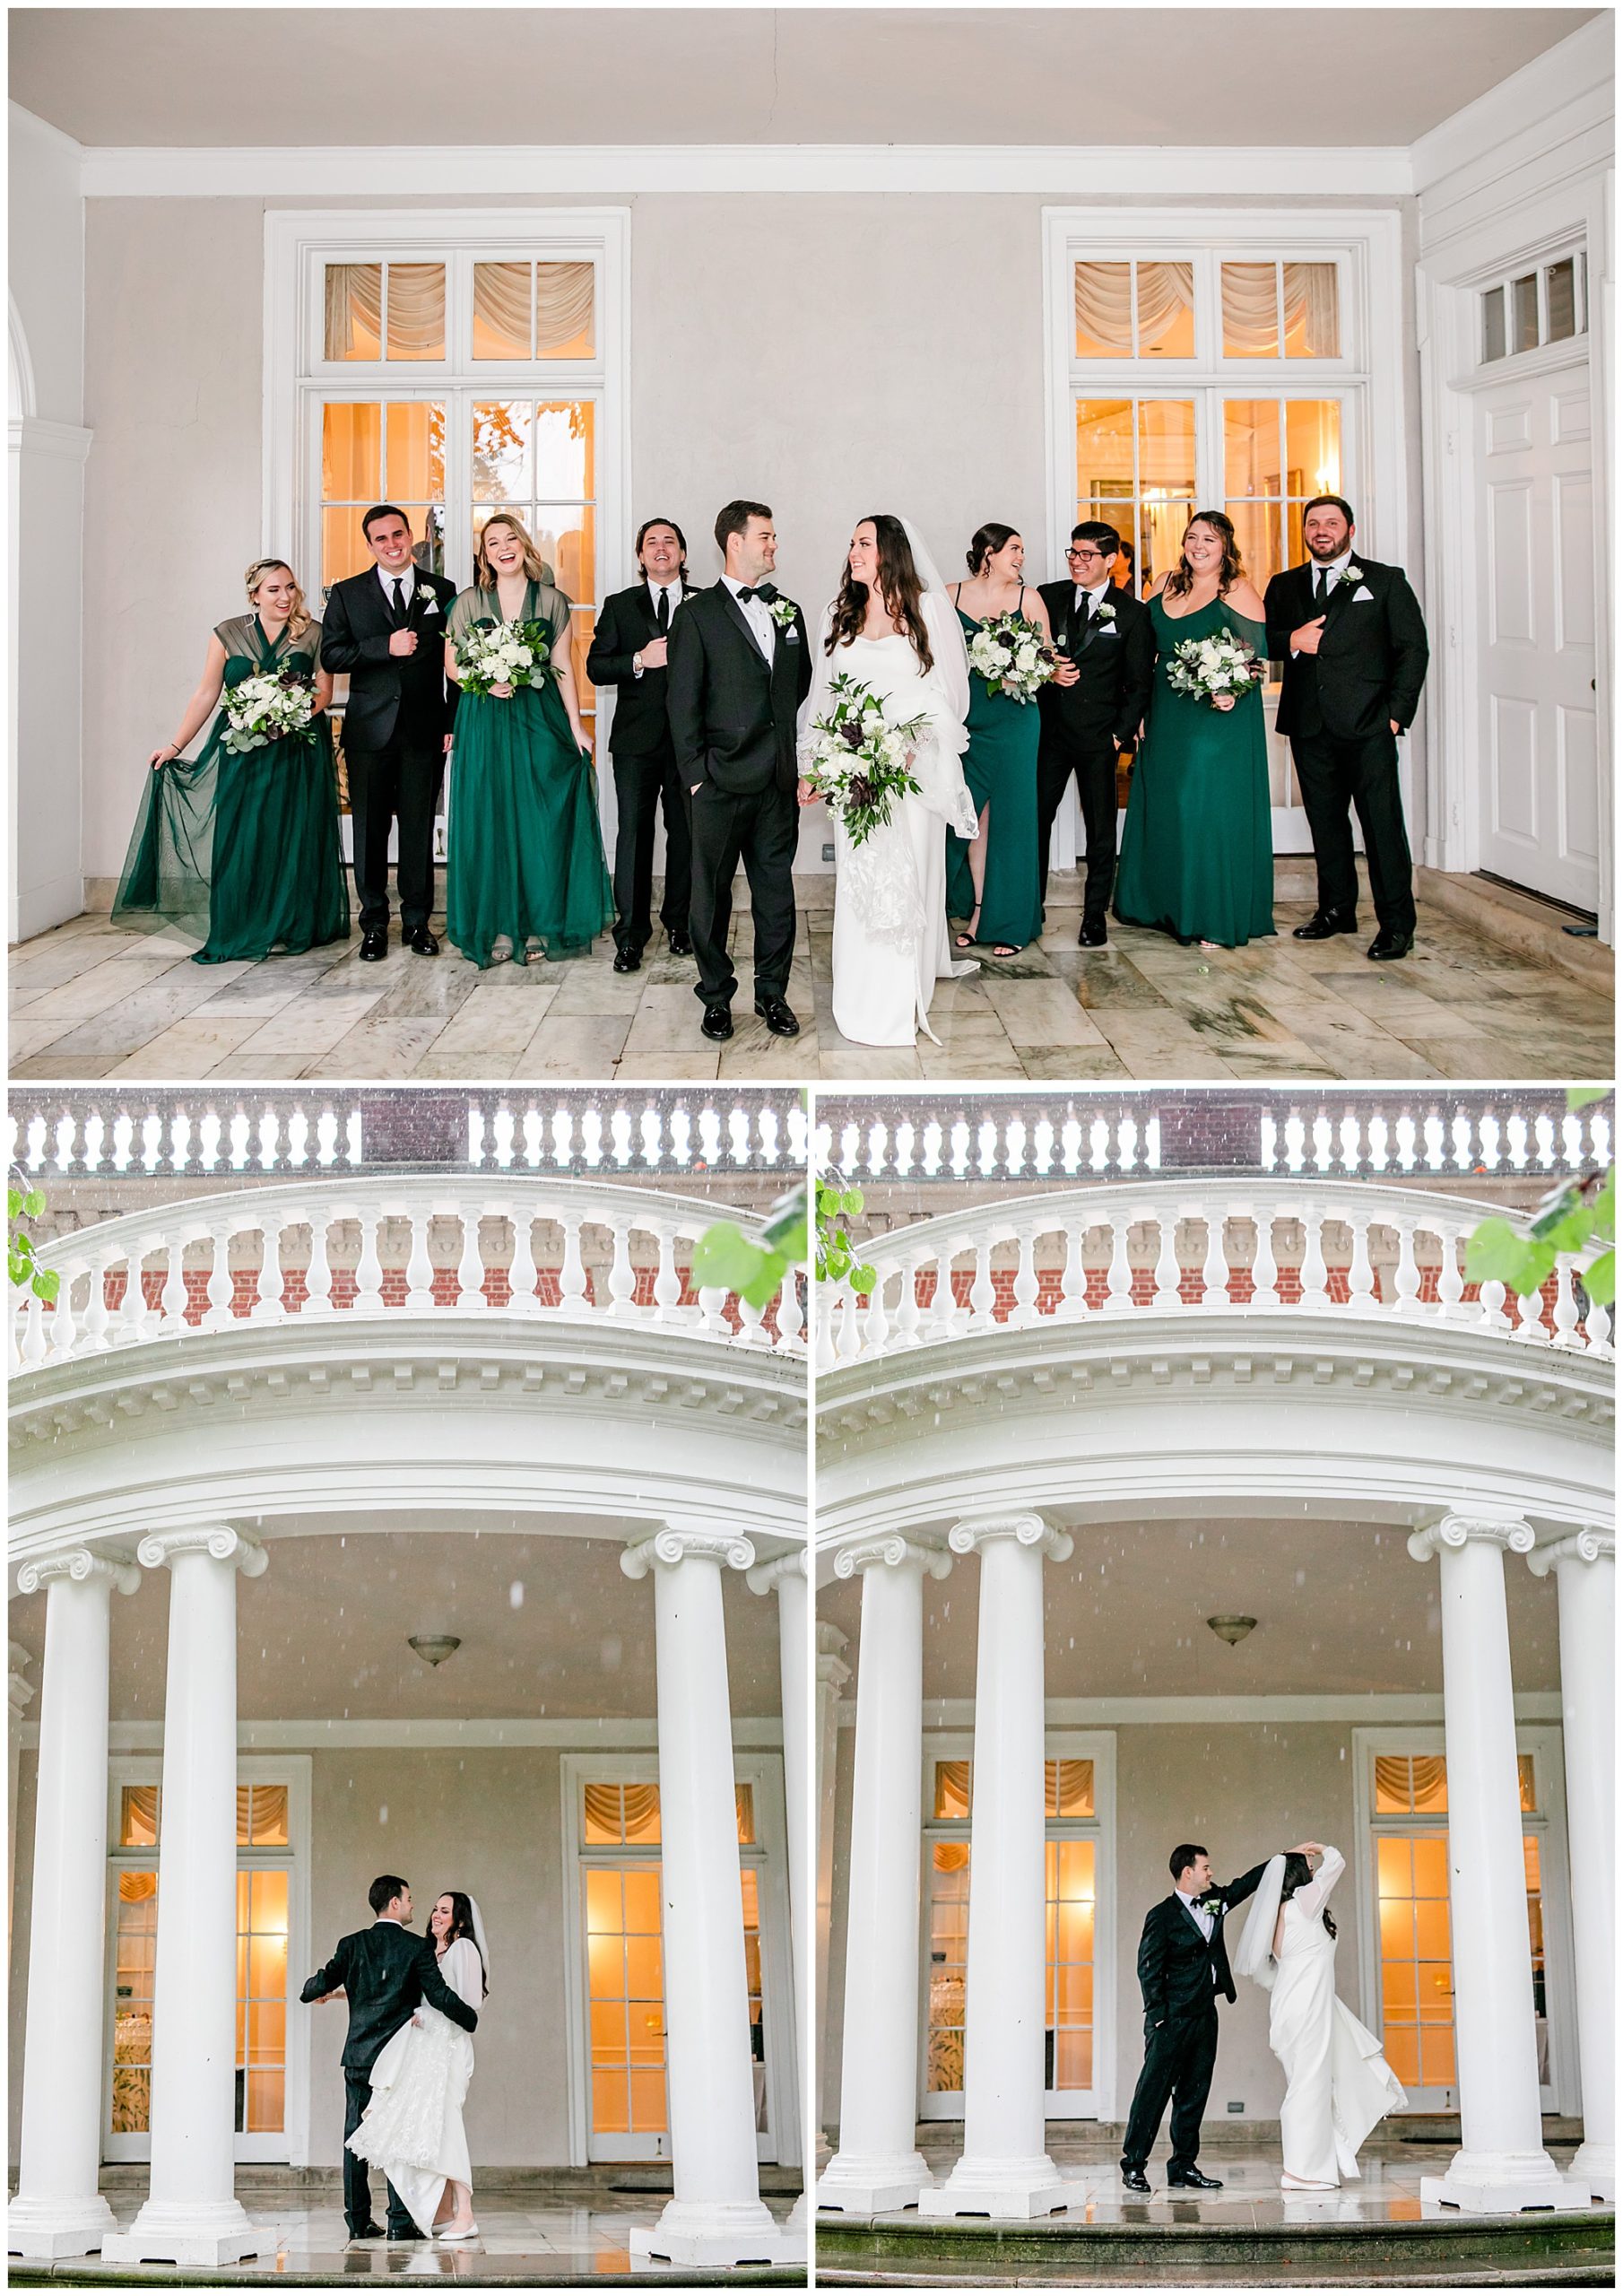 emerald and ivory Woodend Sanctuary wedding, autumn Woodend Sanctuary wedding, rainy day wedding, Maryland wedding venues, Chevy Chase MD wedding venue, mansion wedding, manor house wedding, indoor wedding, DC wedding venue, DC wedding photographer, Baltimore wedding photographer, Rachel E.H. Photography, emerald and ivory aesthetic, bride and groom with wedding party, wedding party laughing, bride and groom dancing, bride and groom under balcony, The Coordinated Collective